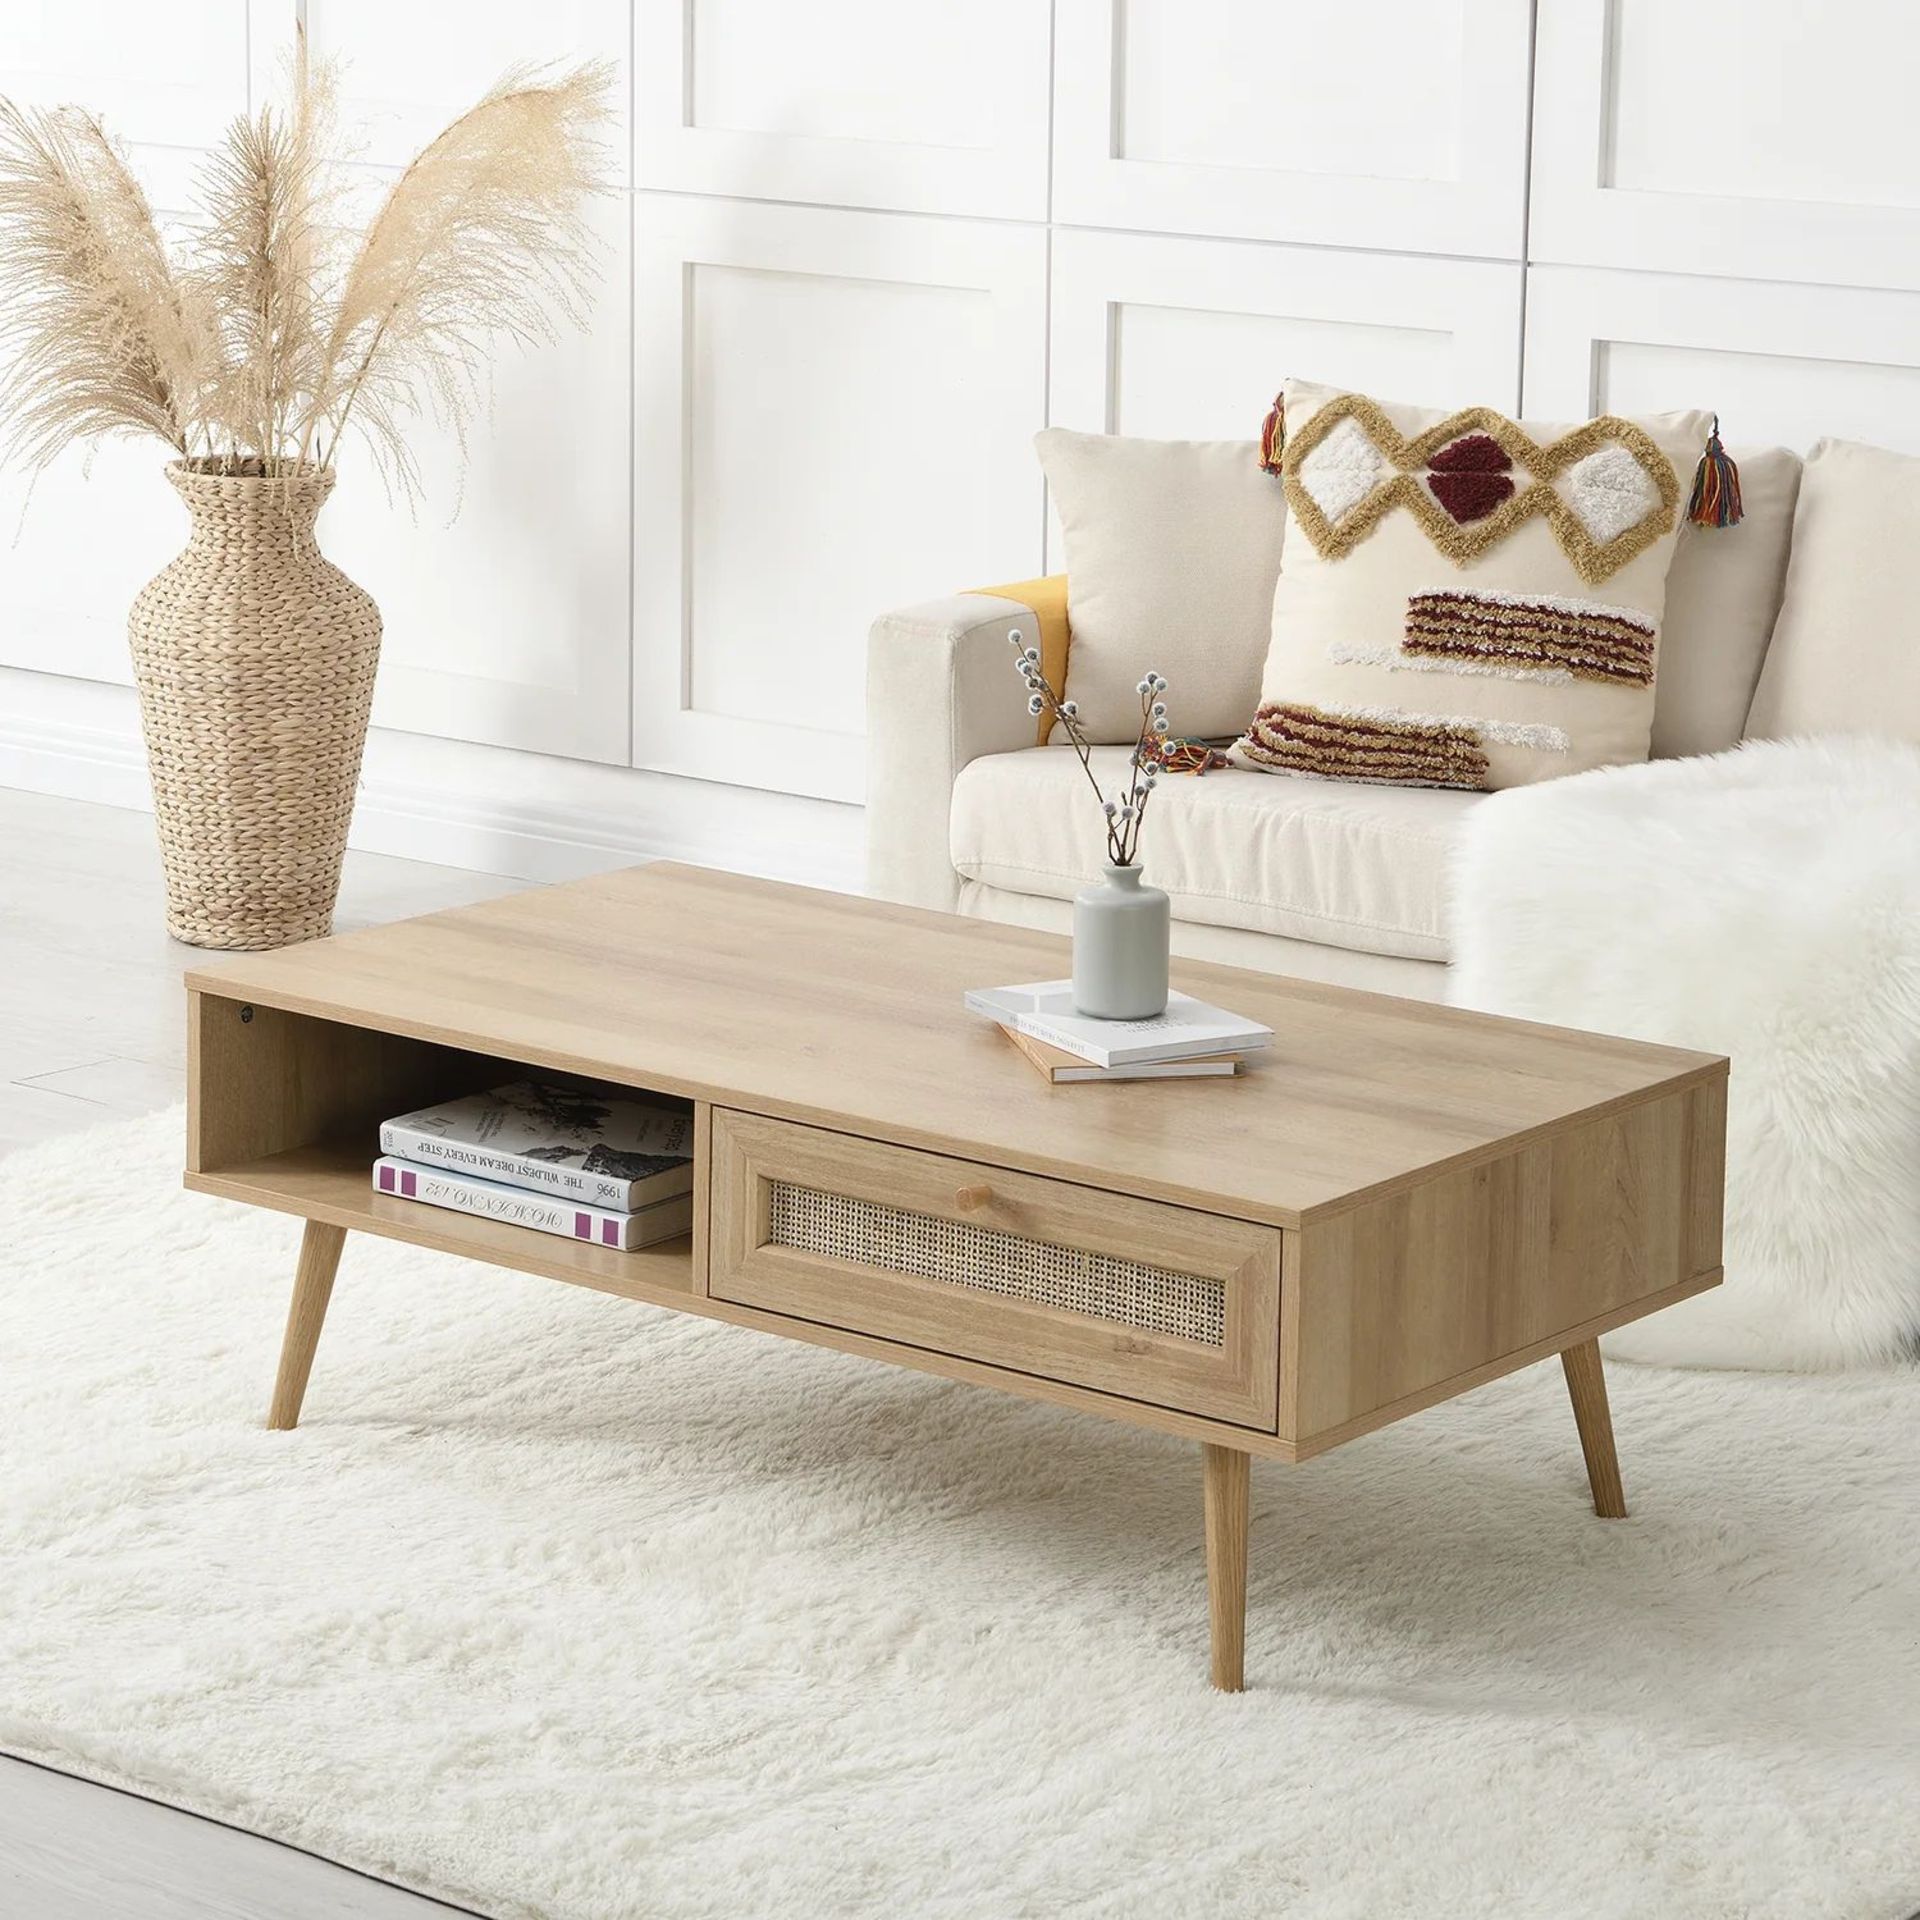 Frances Woven Rattan Wooden Coffee Table in Natural Colour. - SR3. RRP £199.99. Our Frances coffee